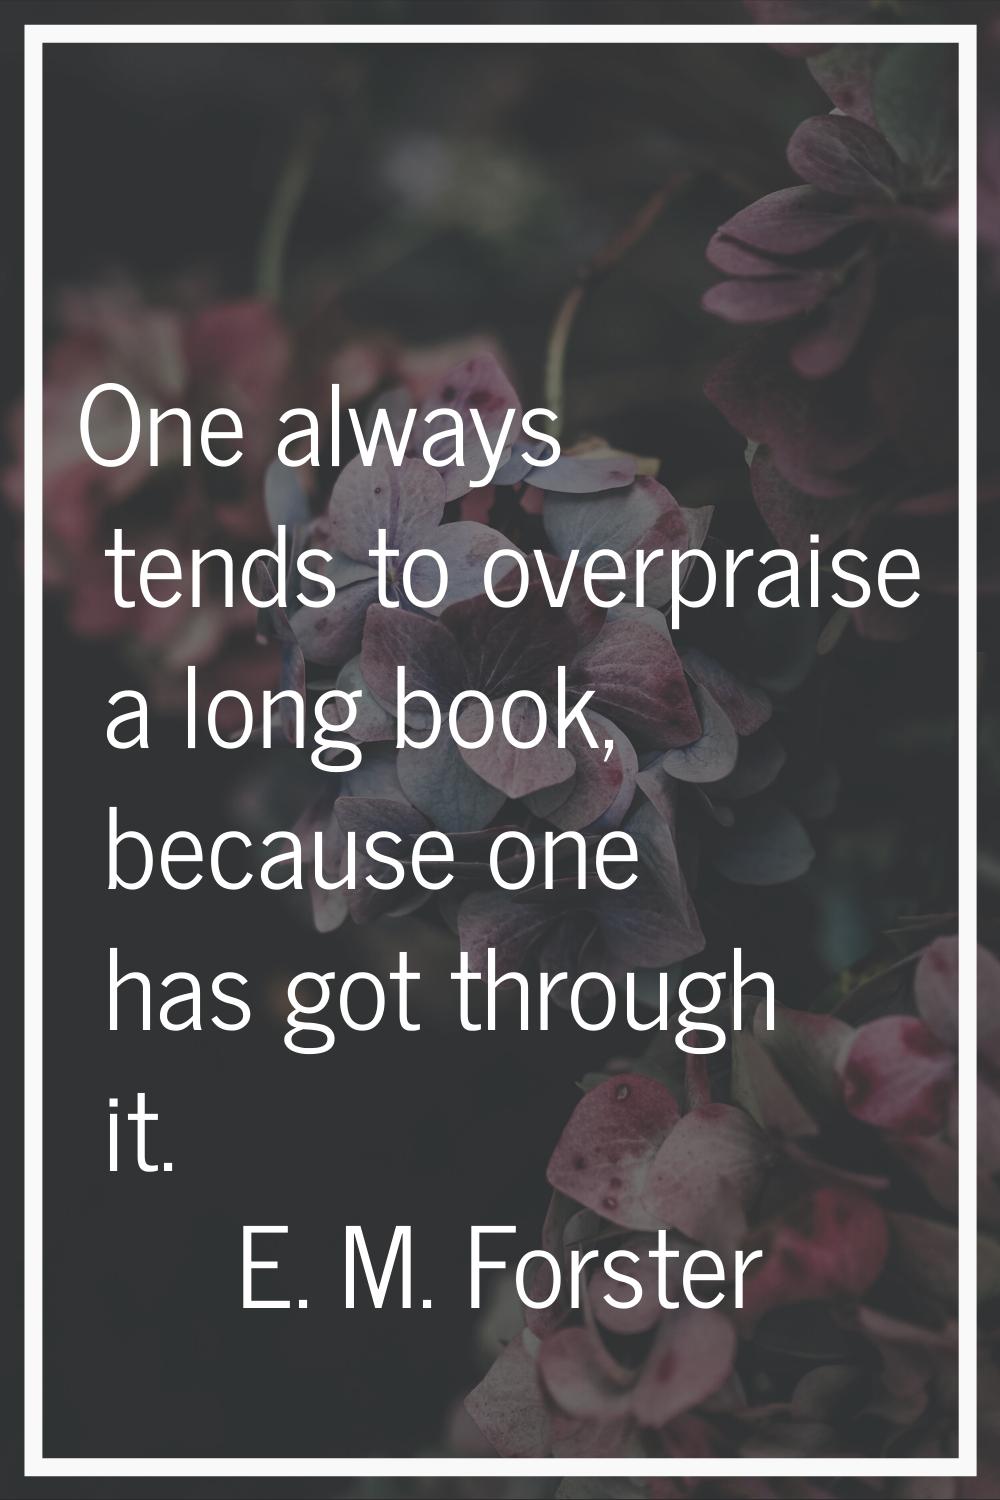 One always tends to overpraise a long book, because one has got through it.